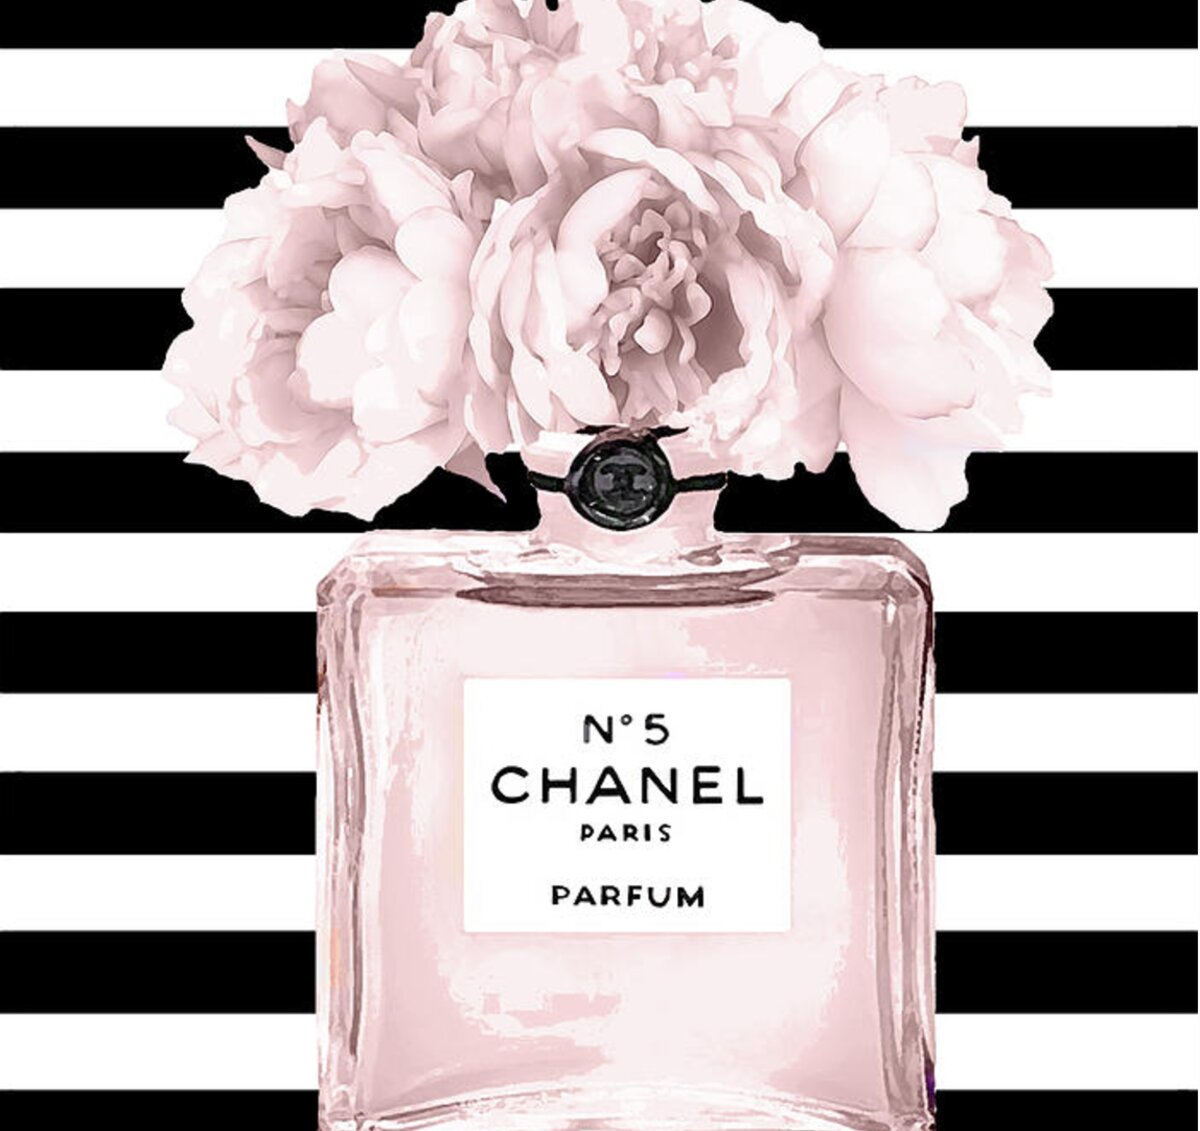 Chanel N.5, Black And White Stripes Face Mask for Sale by Del Art